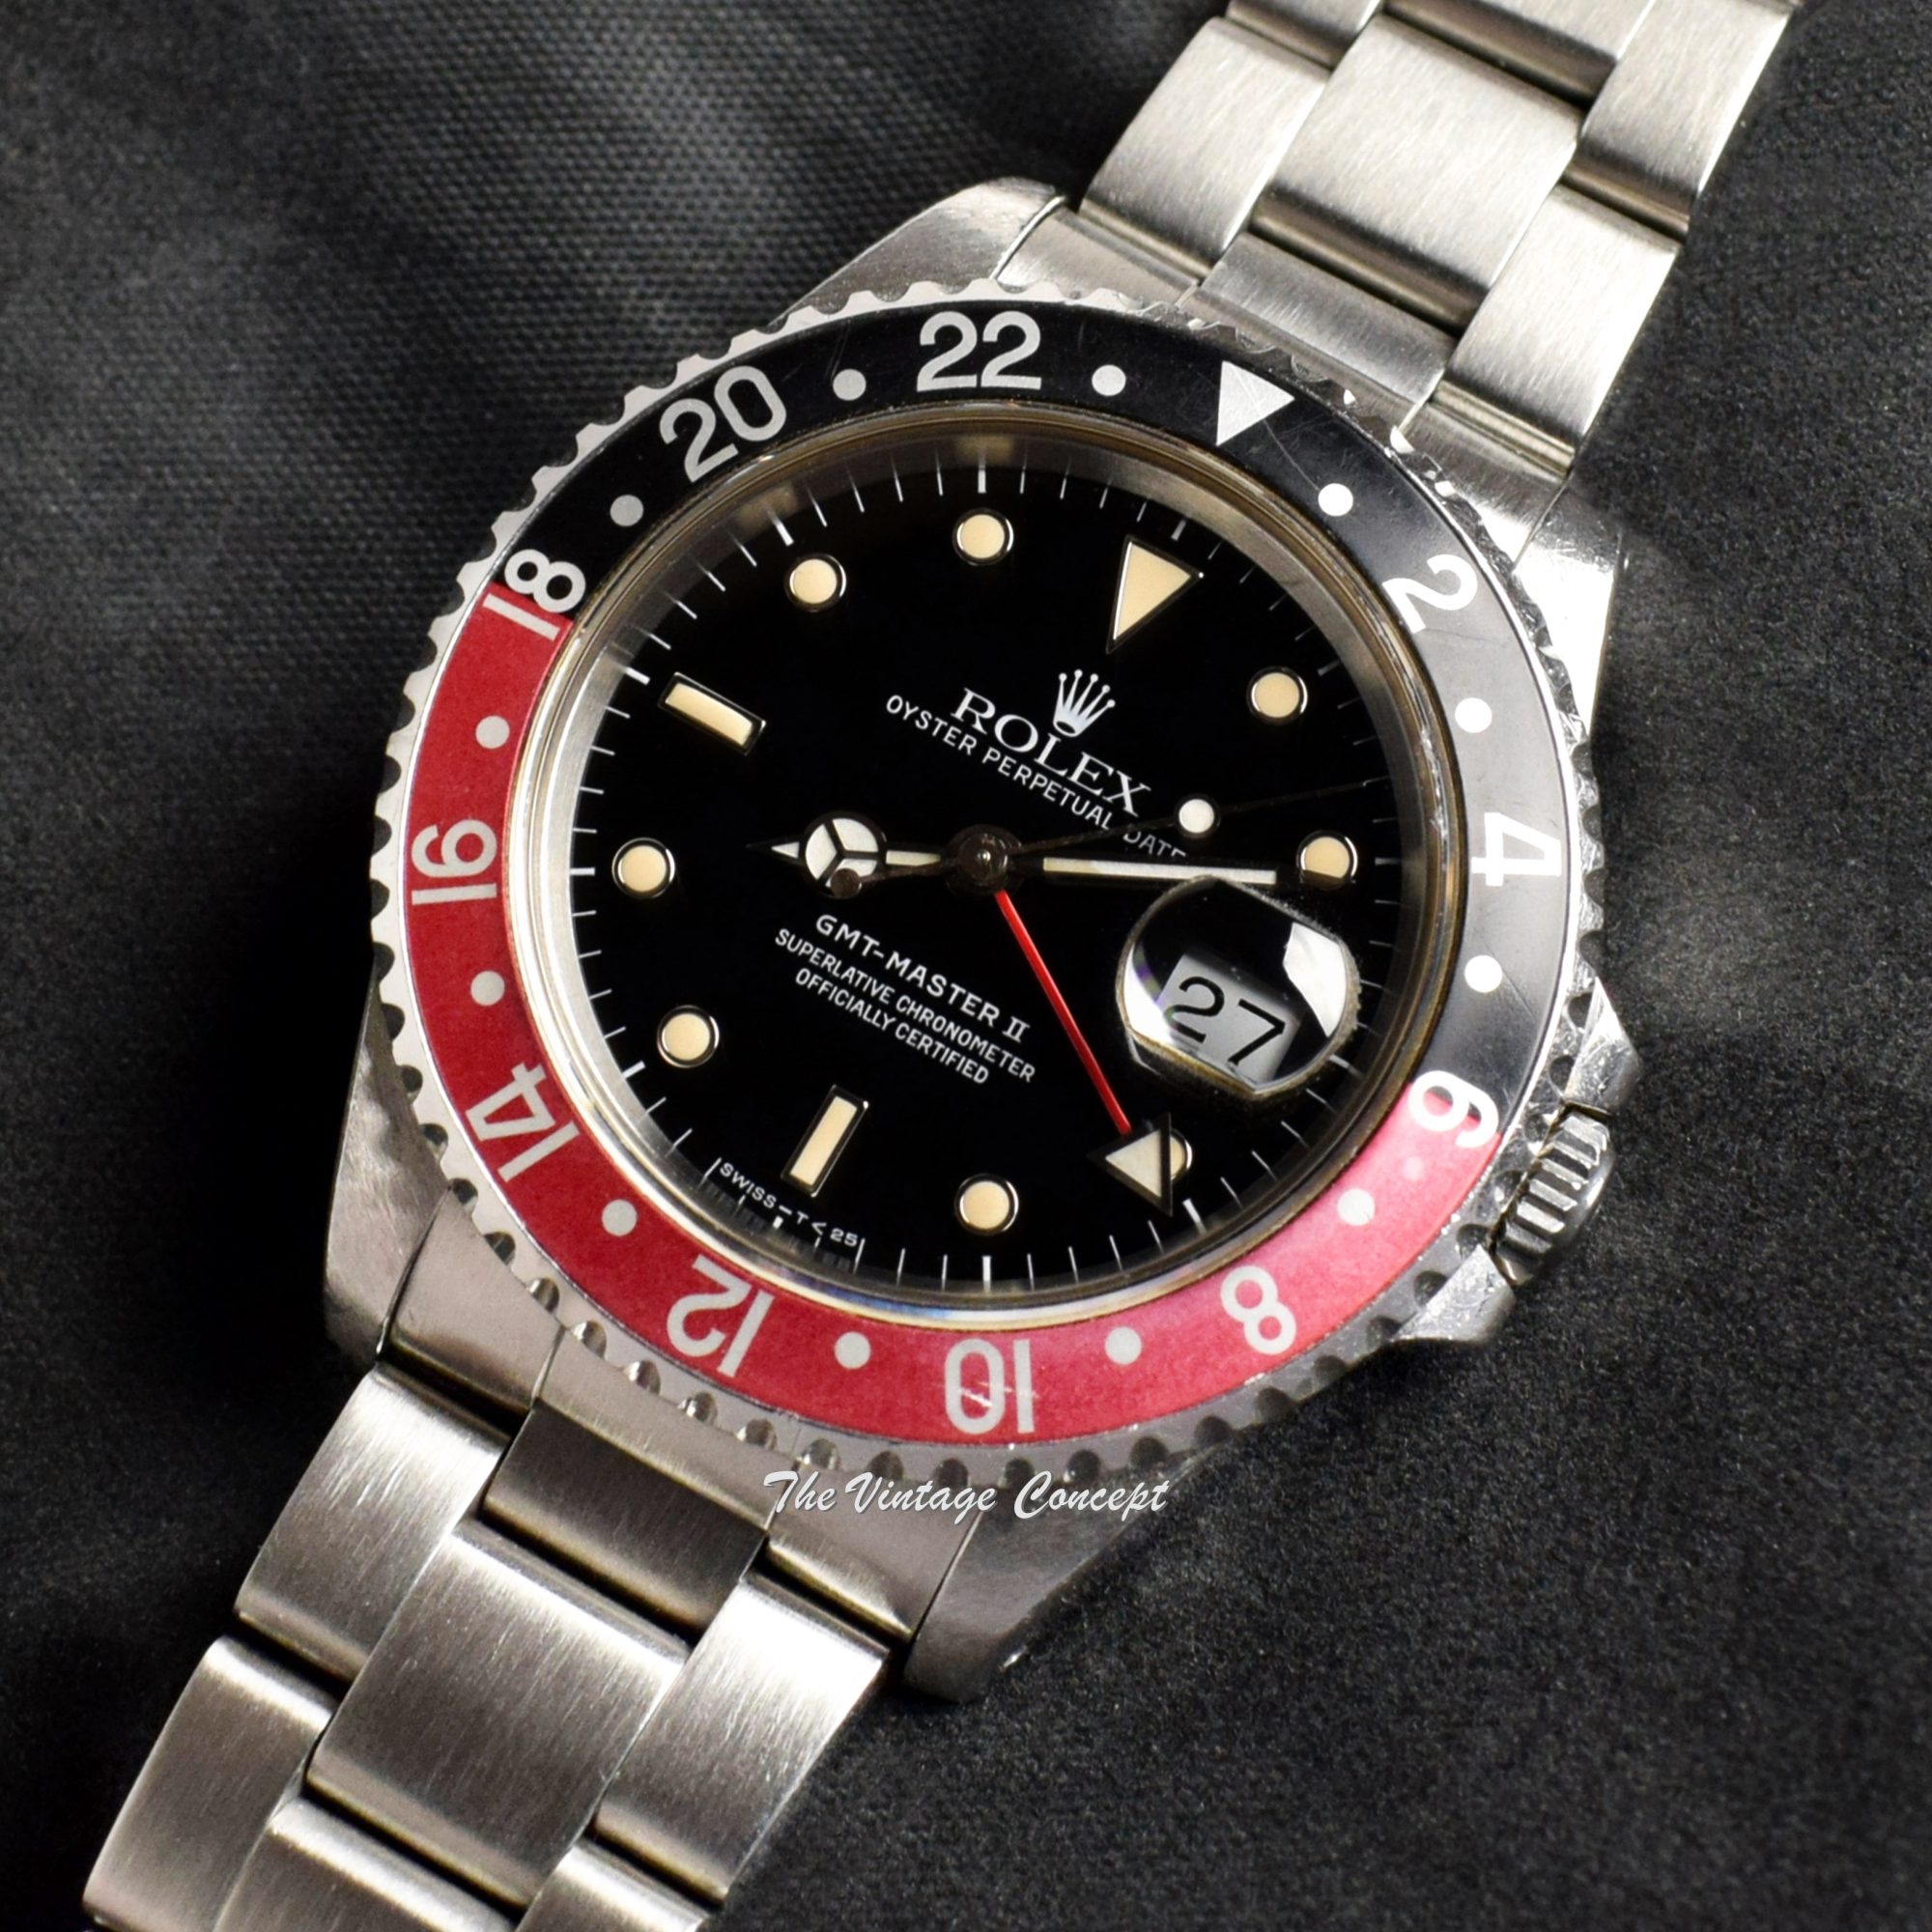 Rolex GMT-Master II Coke Creamy 16710 (SOLD) - The Vintage Concept